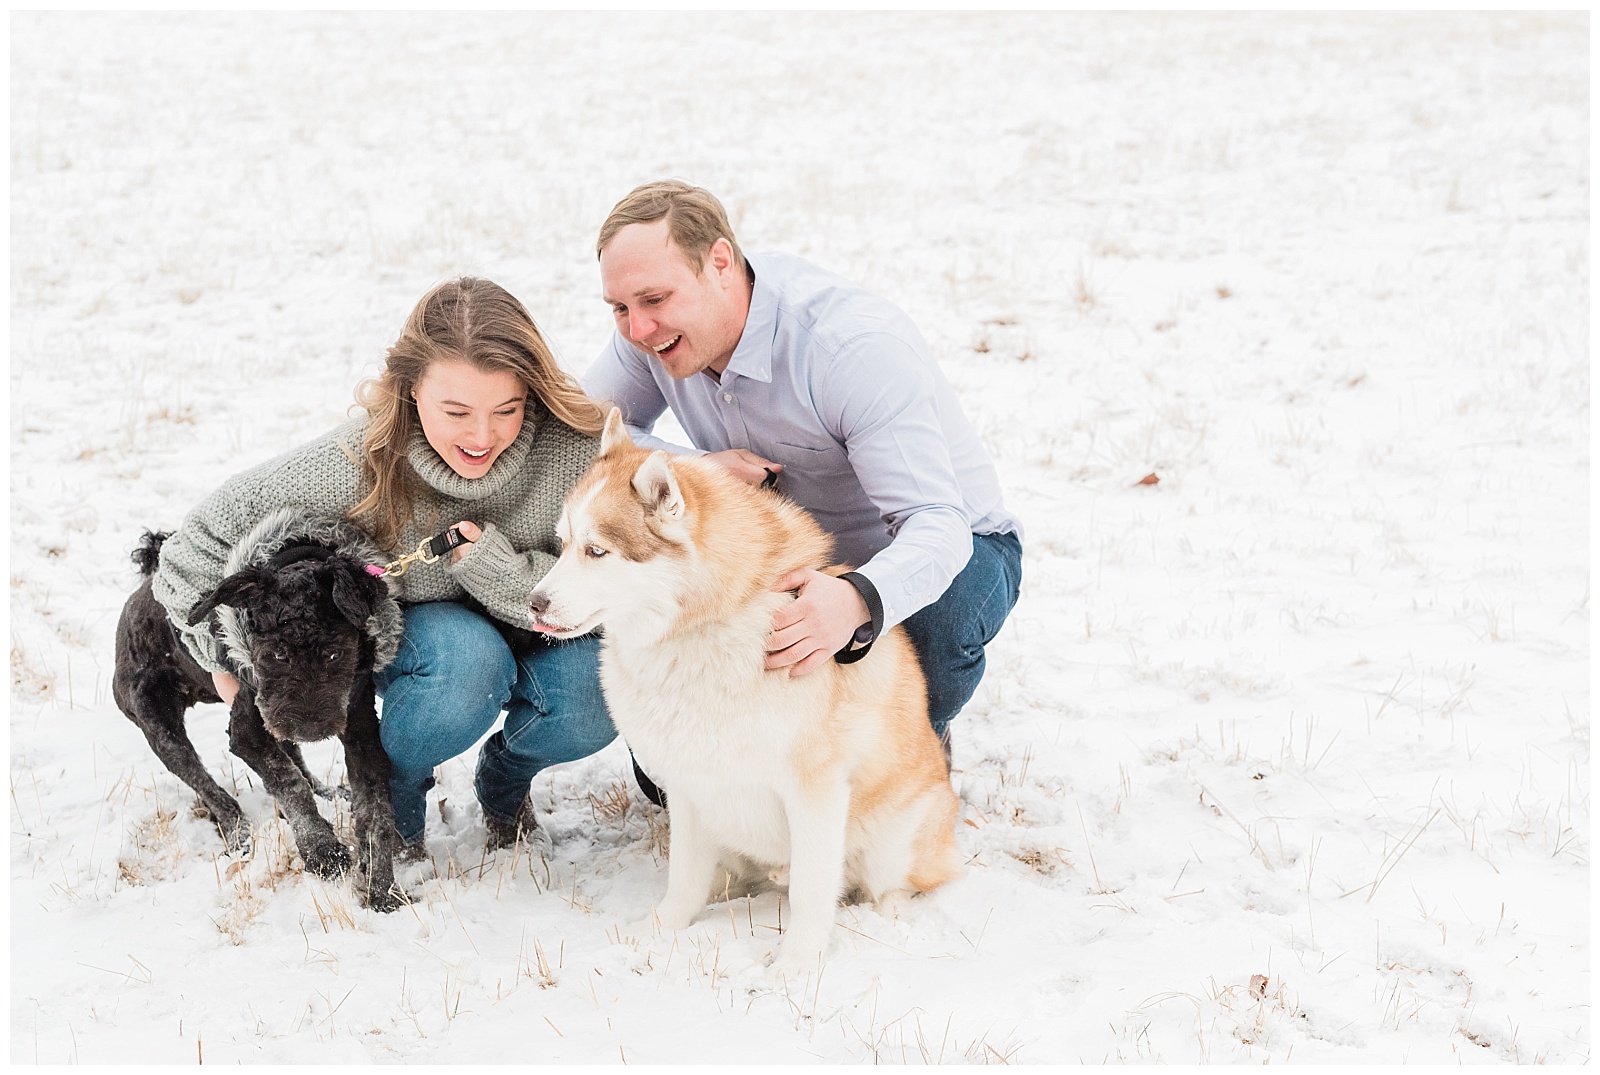 New Jersey Engagement Session, Snowy, Winter, Cozy, Session, Wedding Photographer, dogs, furbabies, husky